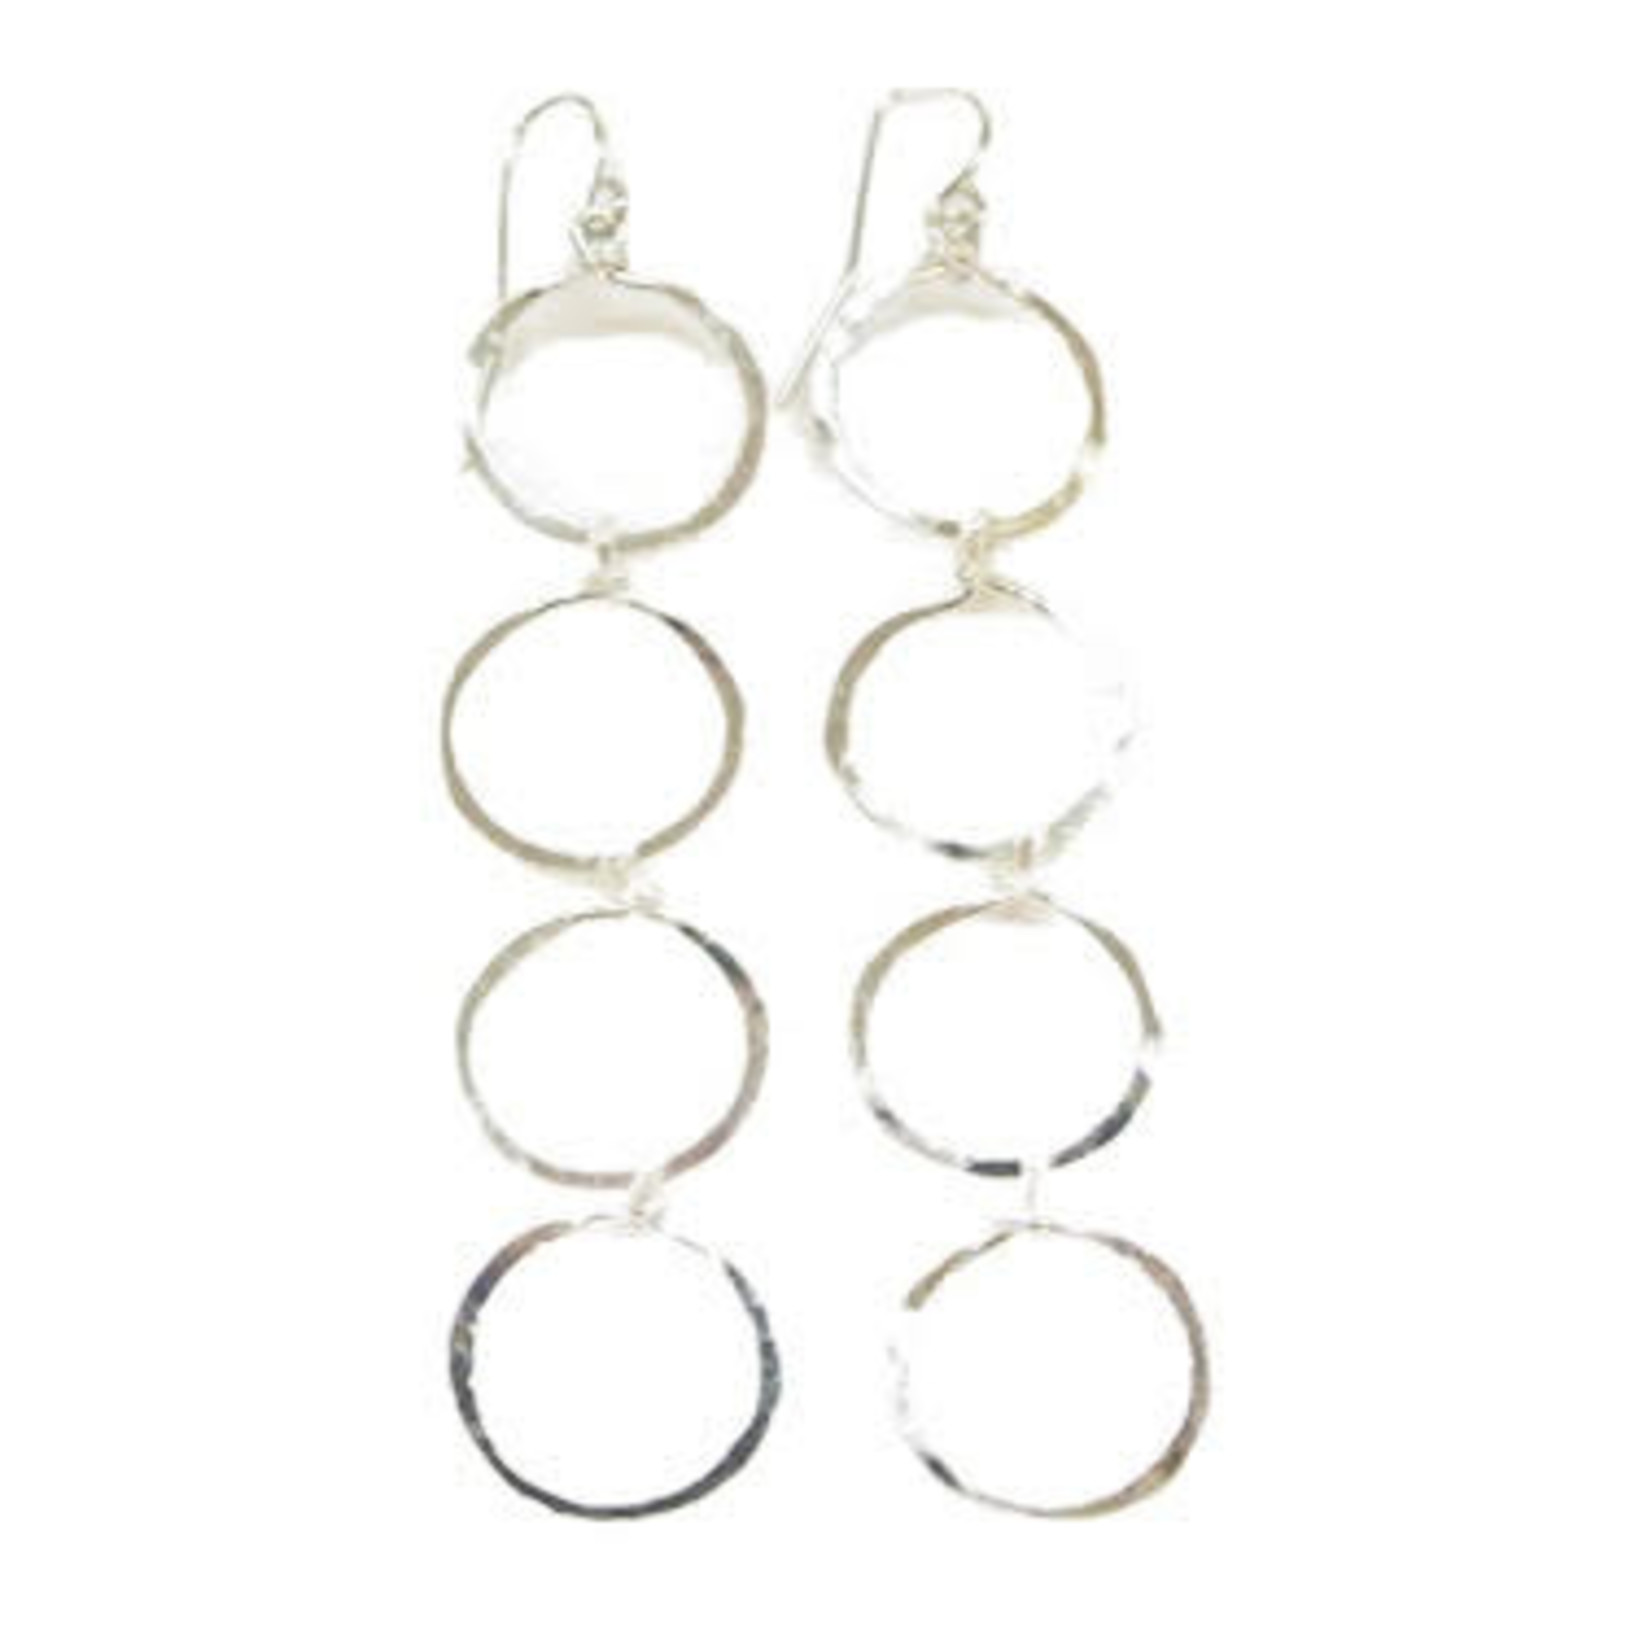 Lani  Silver  Plated Hammered Earrings Four Circles 6S